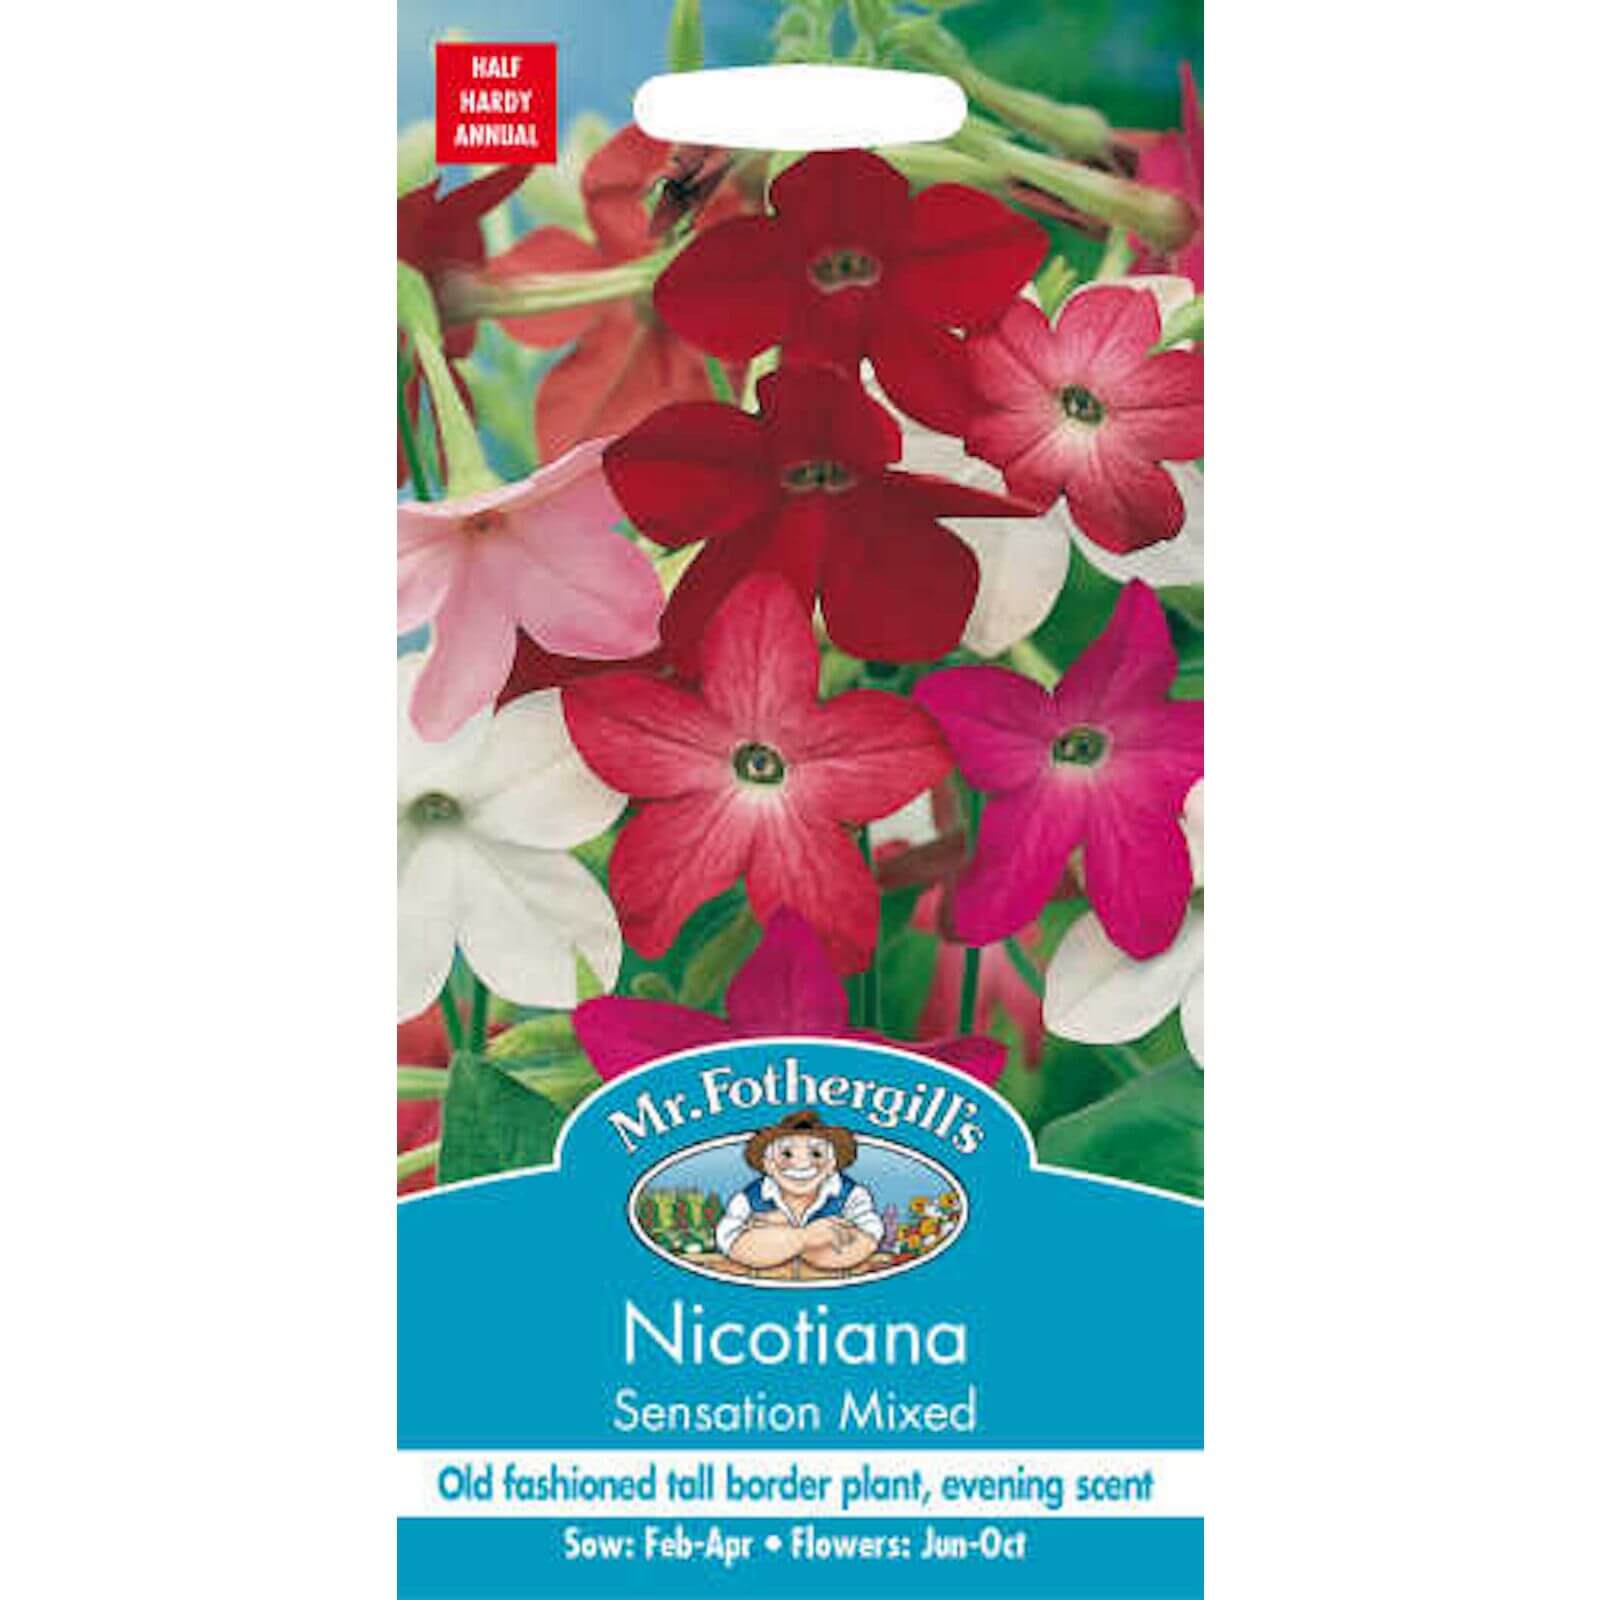 Mr. Fothergill's Nicotiana Sensation Mixed Seeds